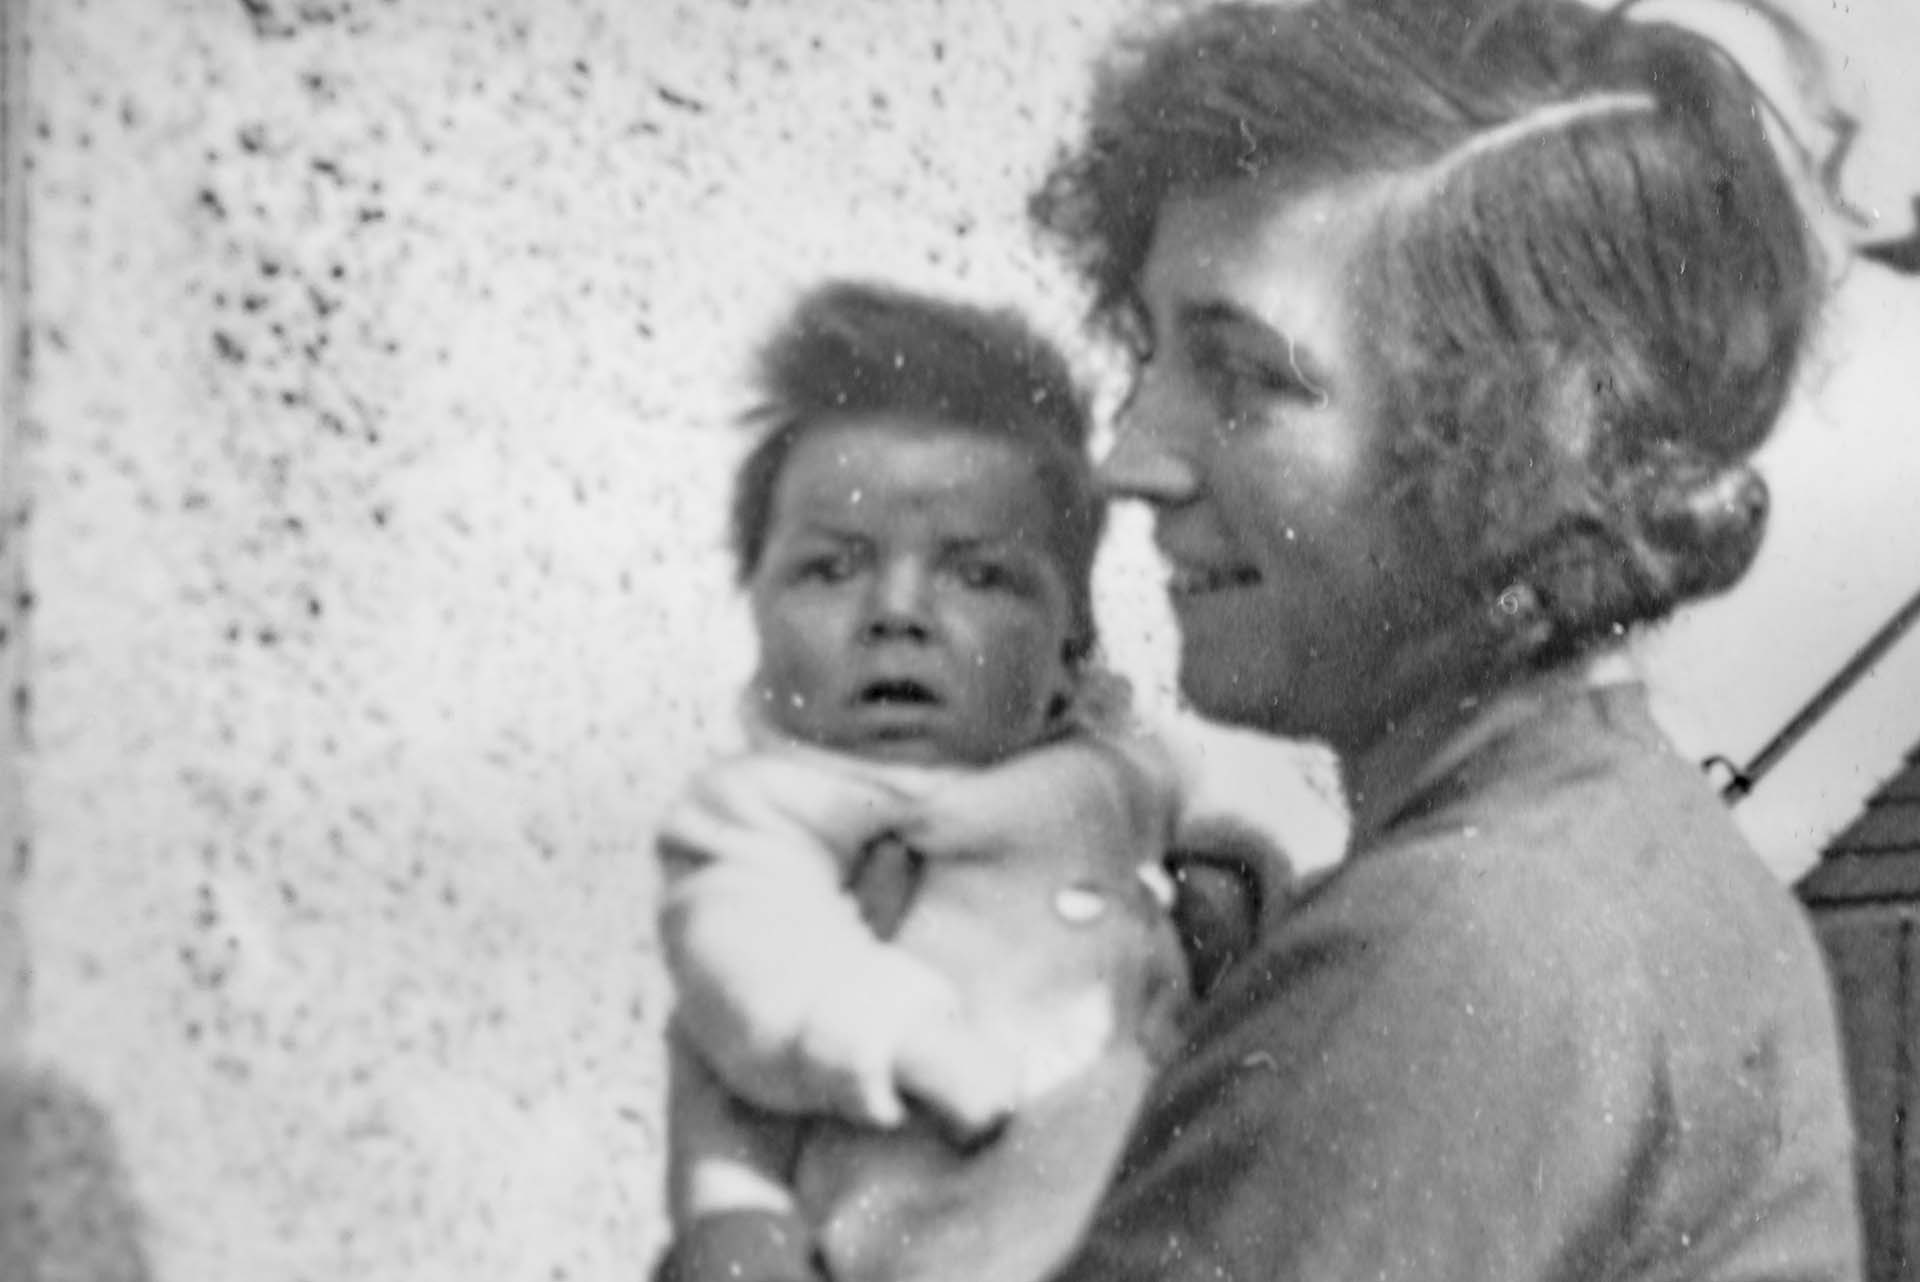 David King with his mother Spring 1936